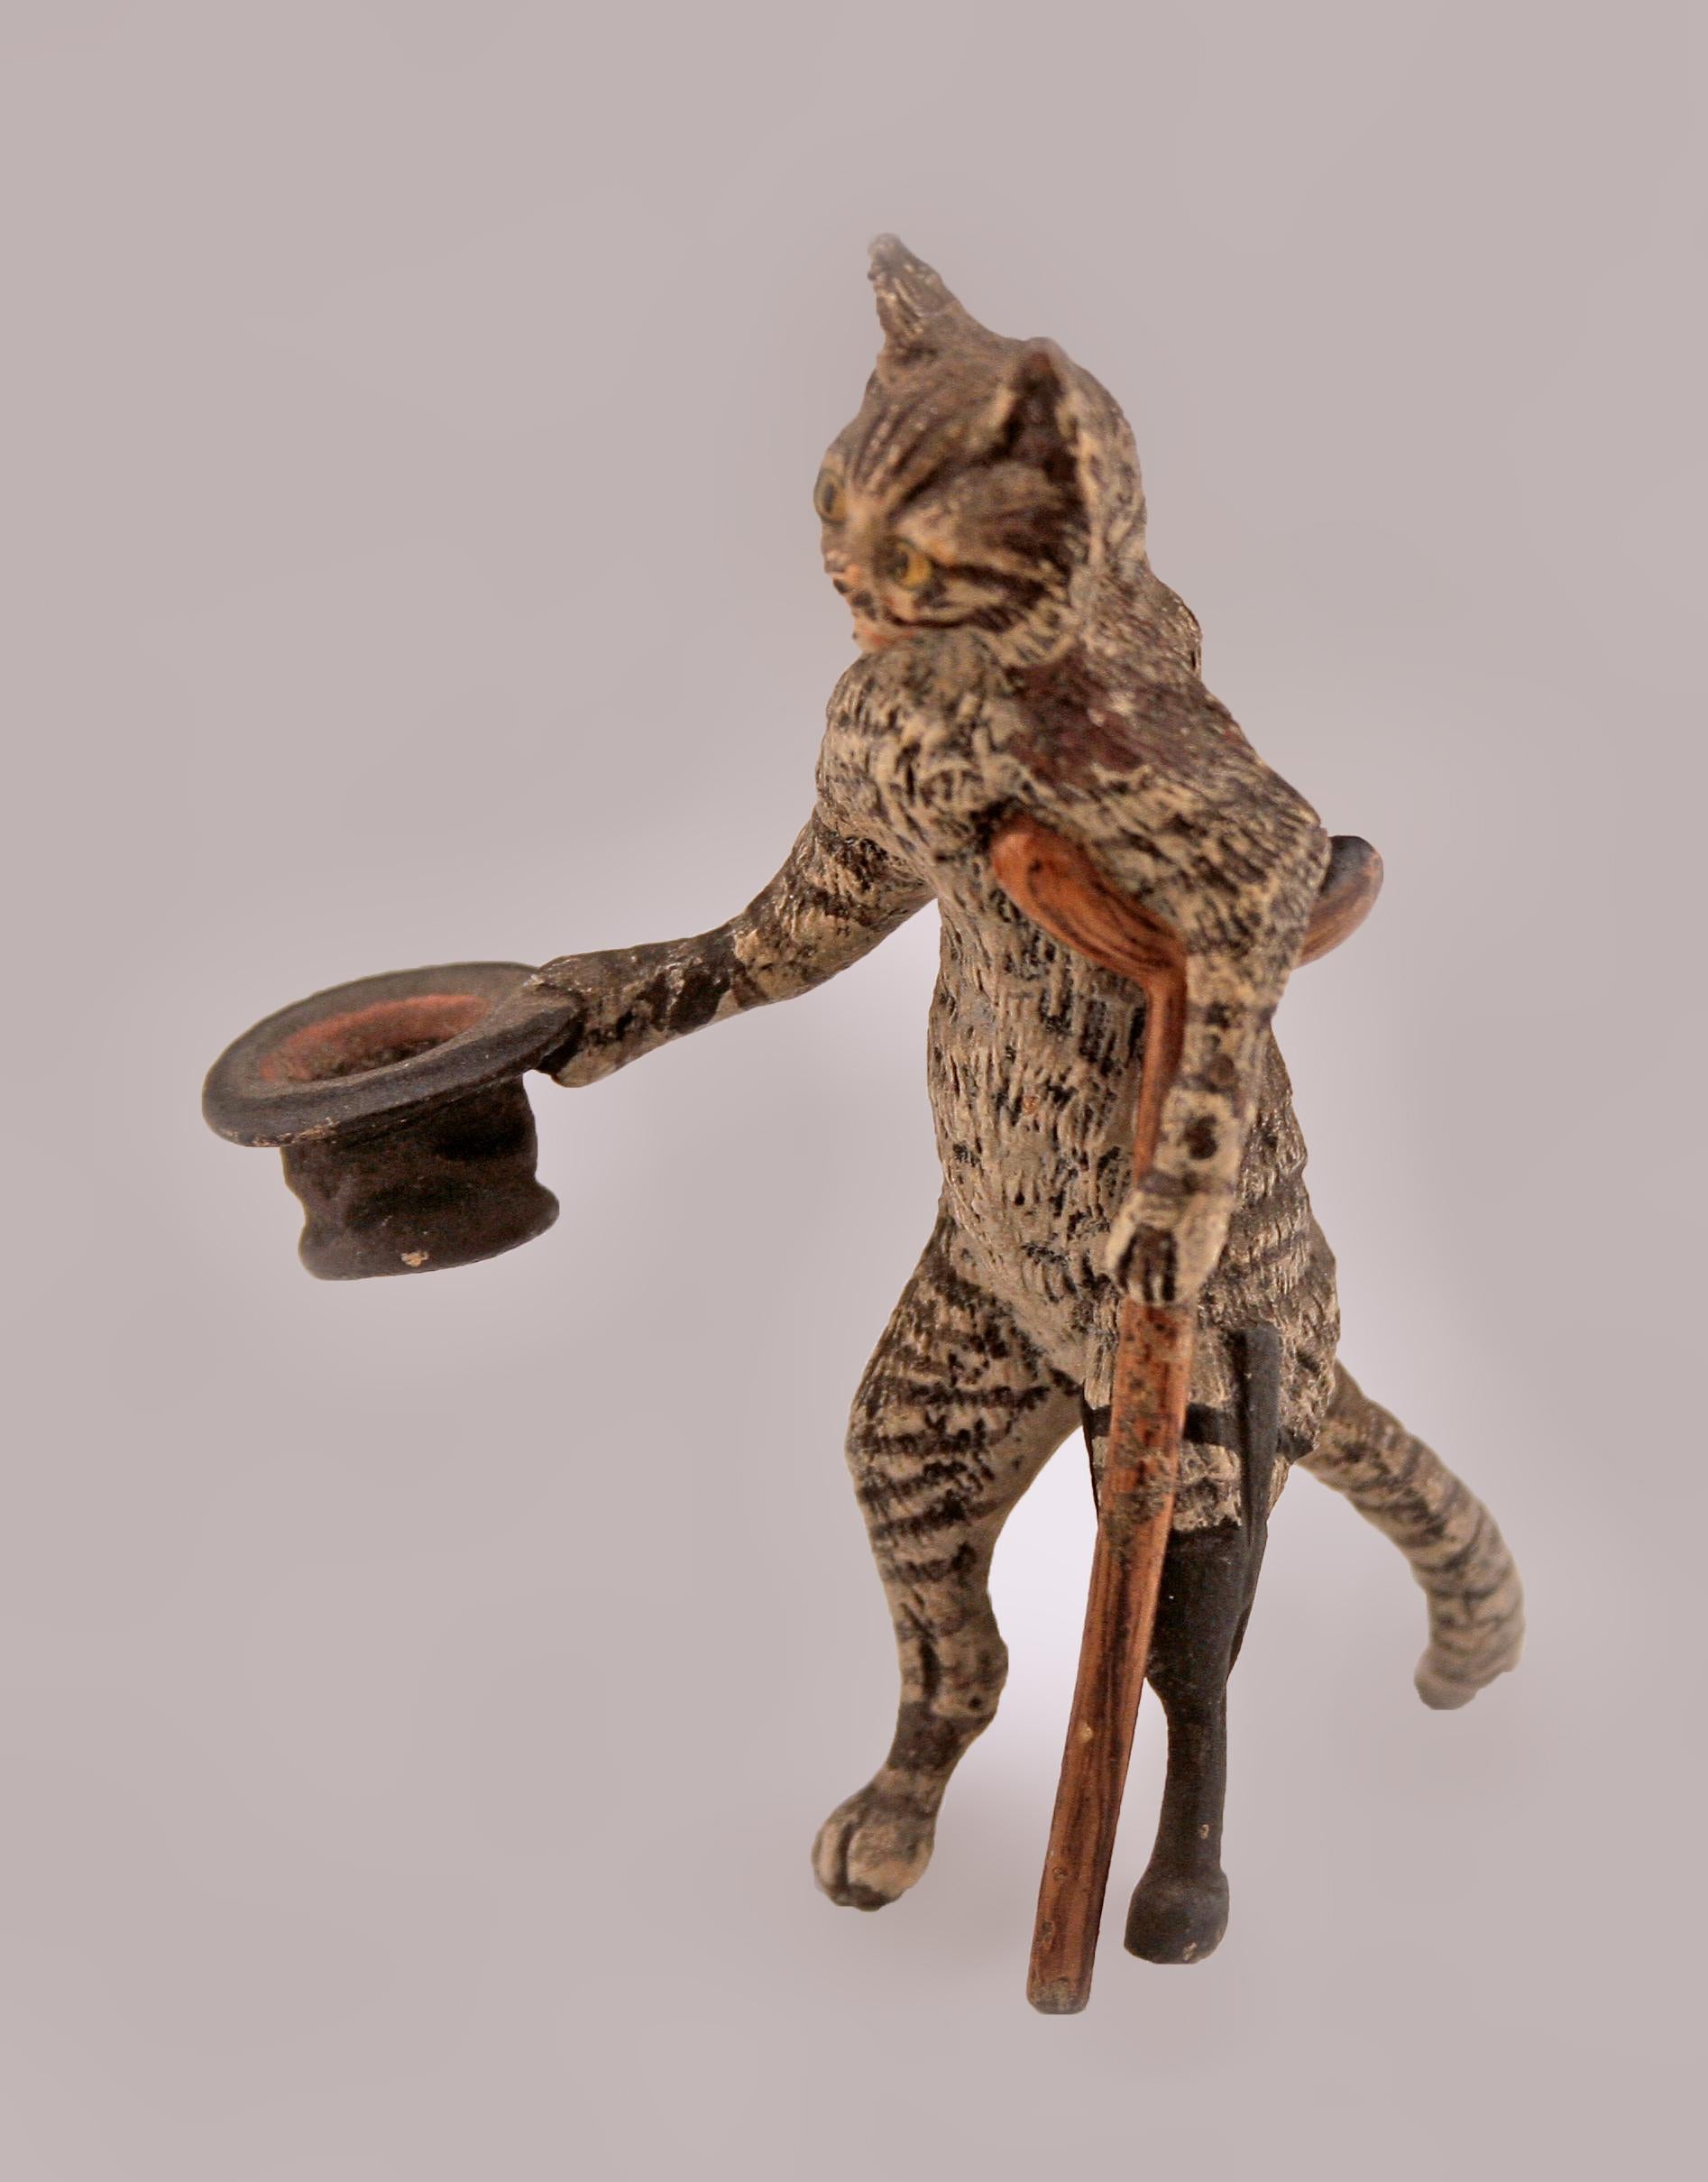 Early 20th century Belle Époque bronze beggar cat by austrian maker Franz Bergmann

By: Franz Bergmann
Material: bronze, paint, copper, metal
Technique: cast, cold-painted, painted, patinated, metalwork, molded
Dimensions: 2.5 in x 2 in x 3 in
Date: